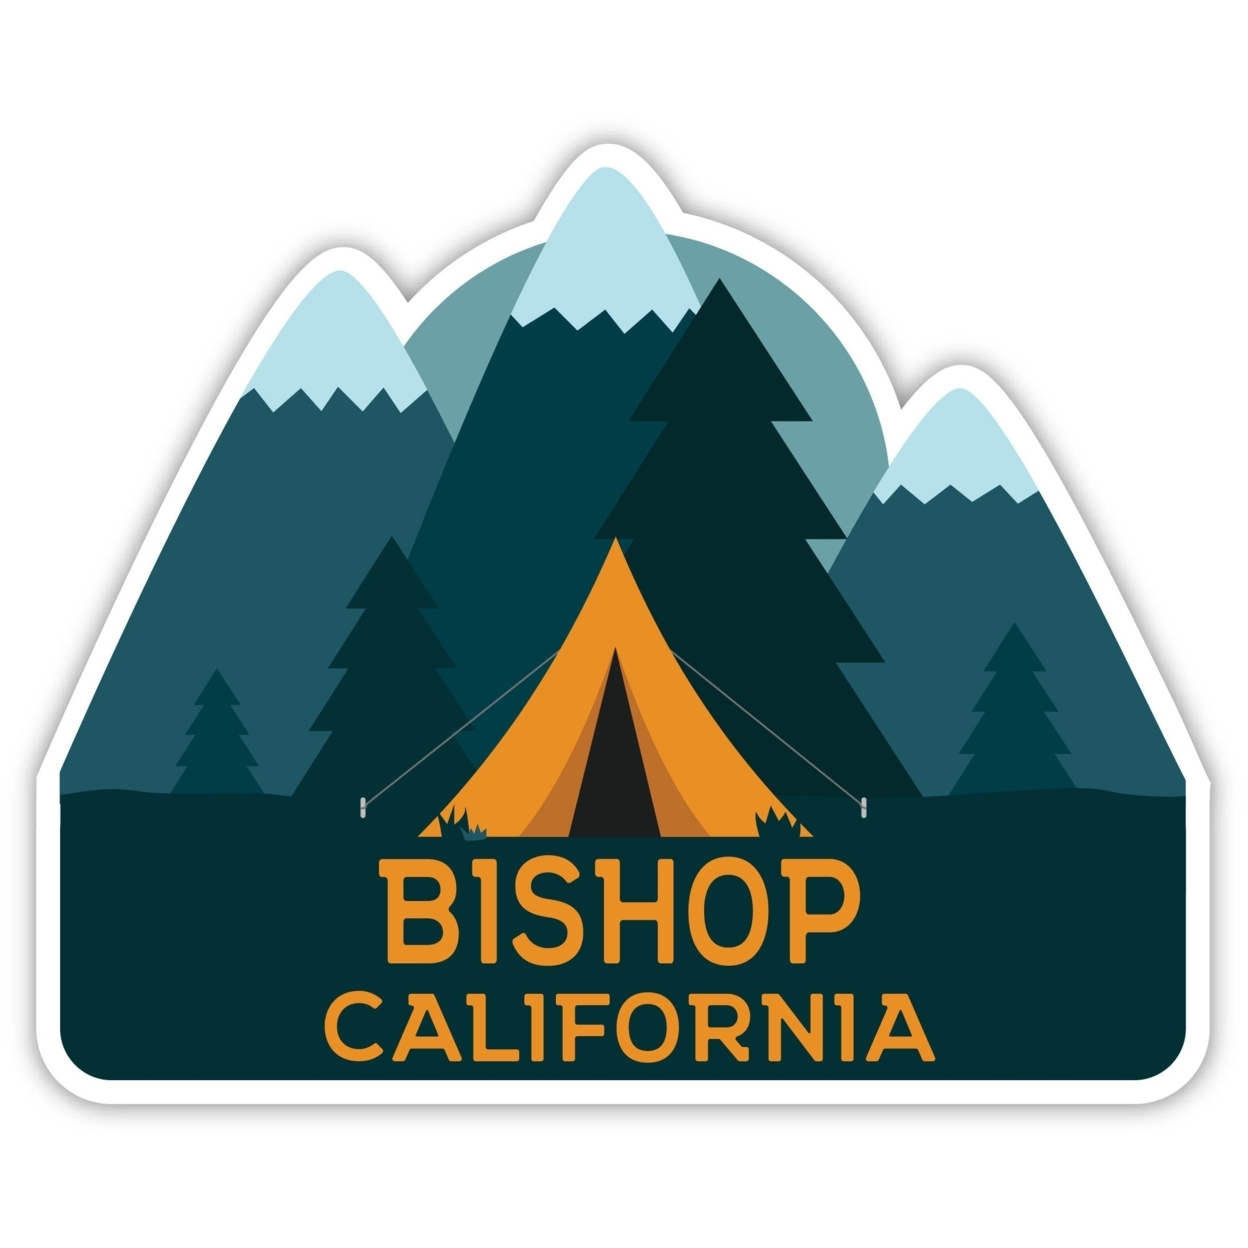 Bishop California Souvenir Decorative Stickers (Choose Theme And Size) - 4-Pack, 8-Inch, Tent